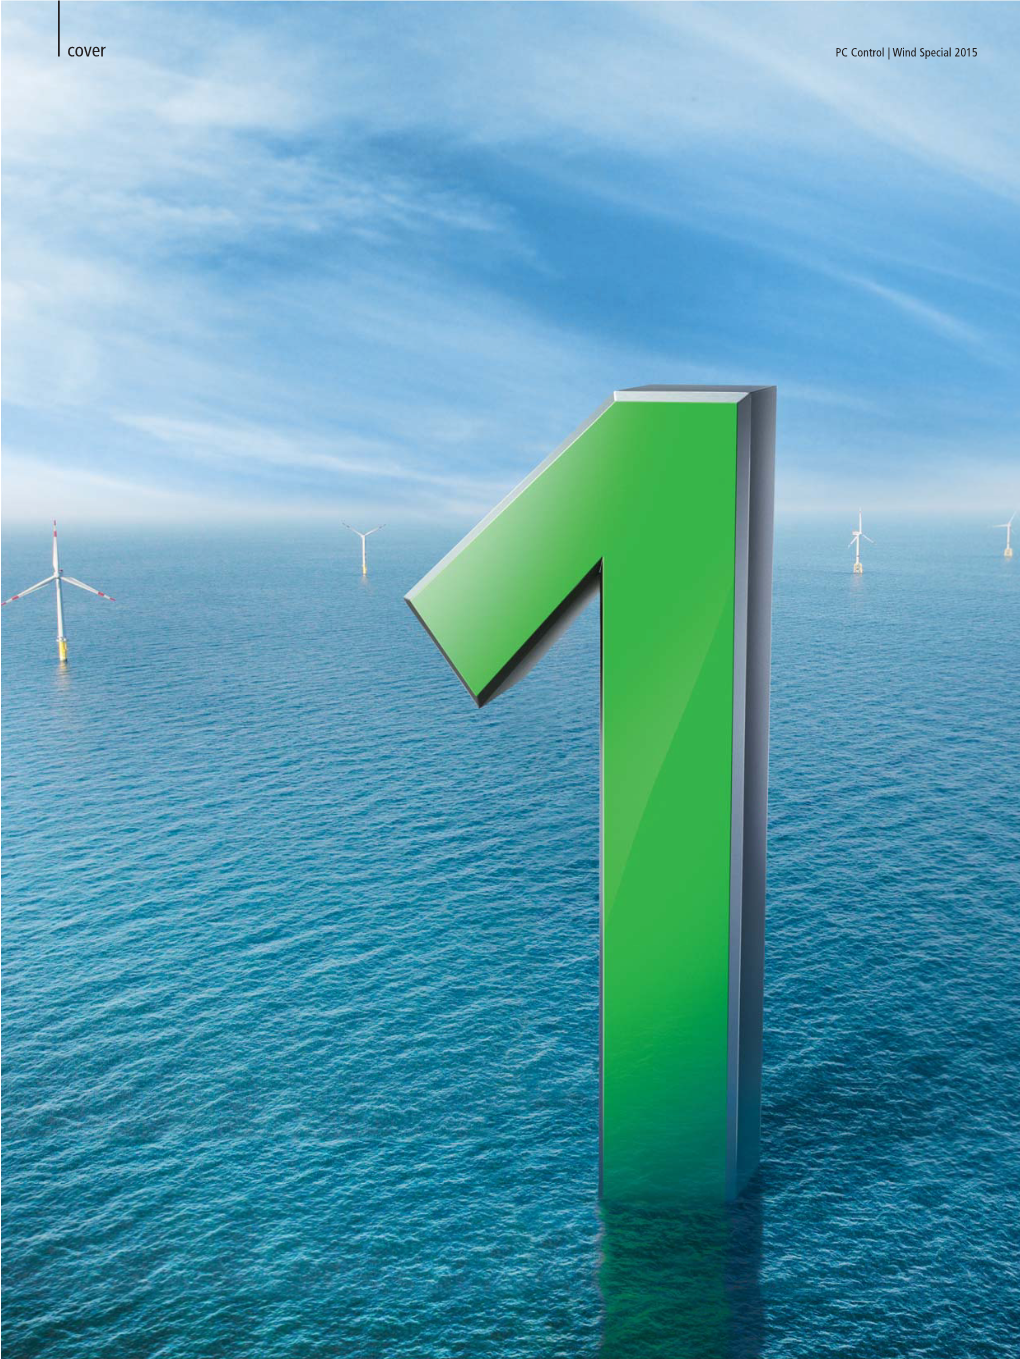 Twincat 3 Wind Framework for Wind Turbine Automation 1 Framework and 10 Years of Expertise Through 40,000 Installations